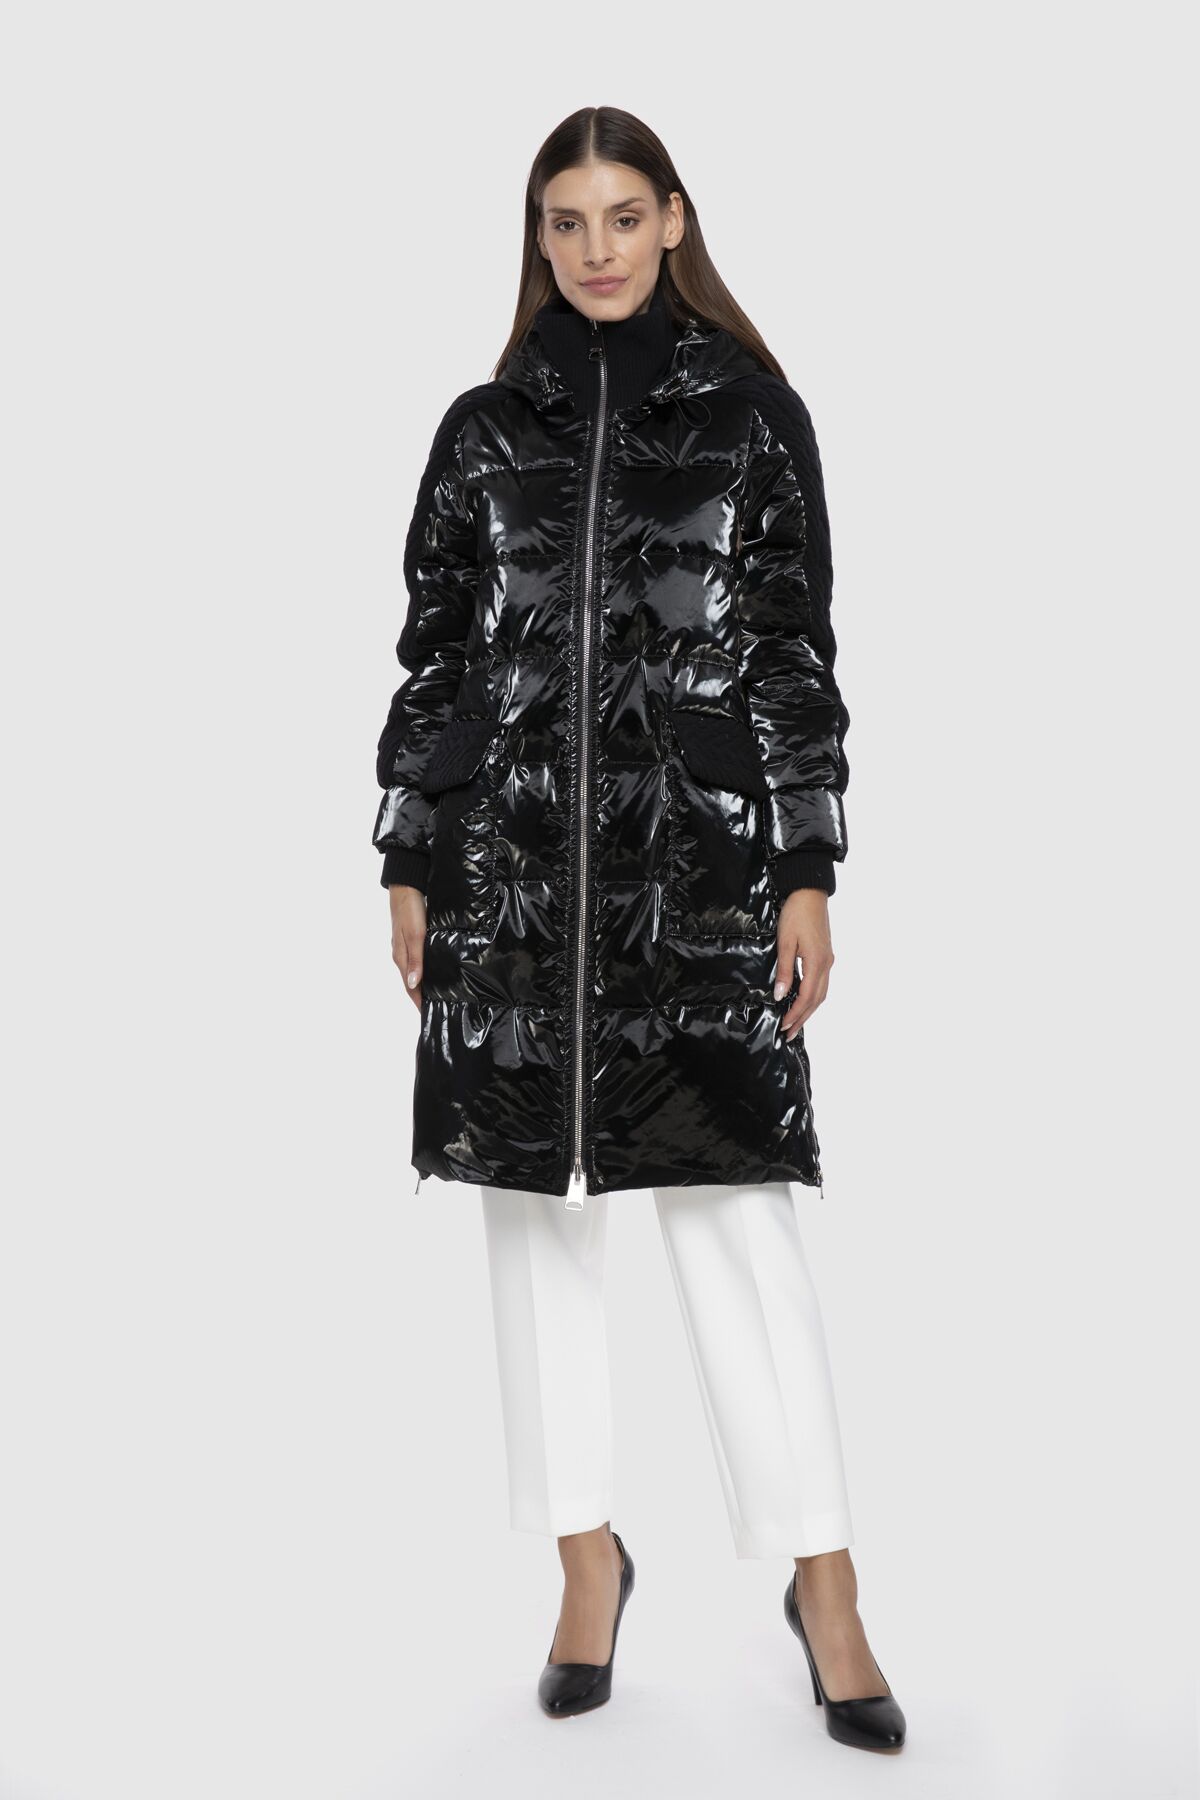  GIZIA - Knitwear Detailed Fur Hooded Black Long Inflatable Coat